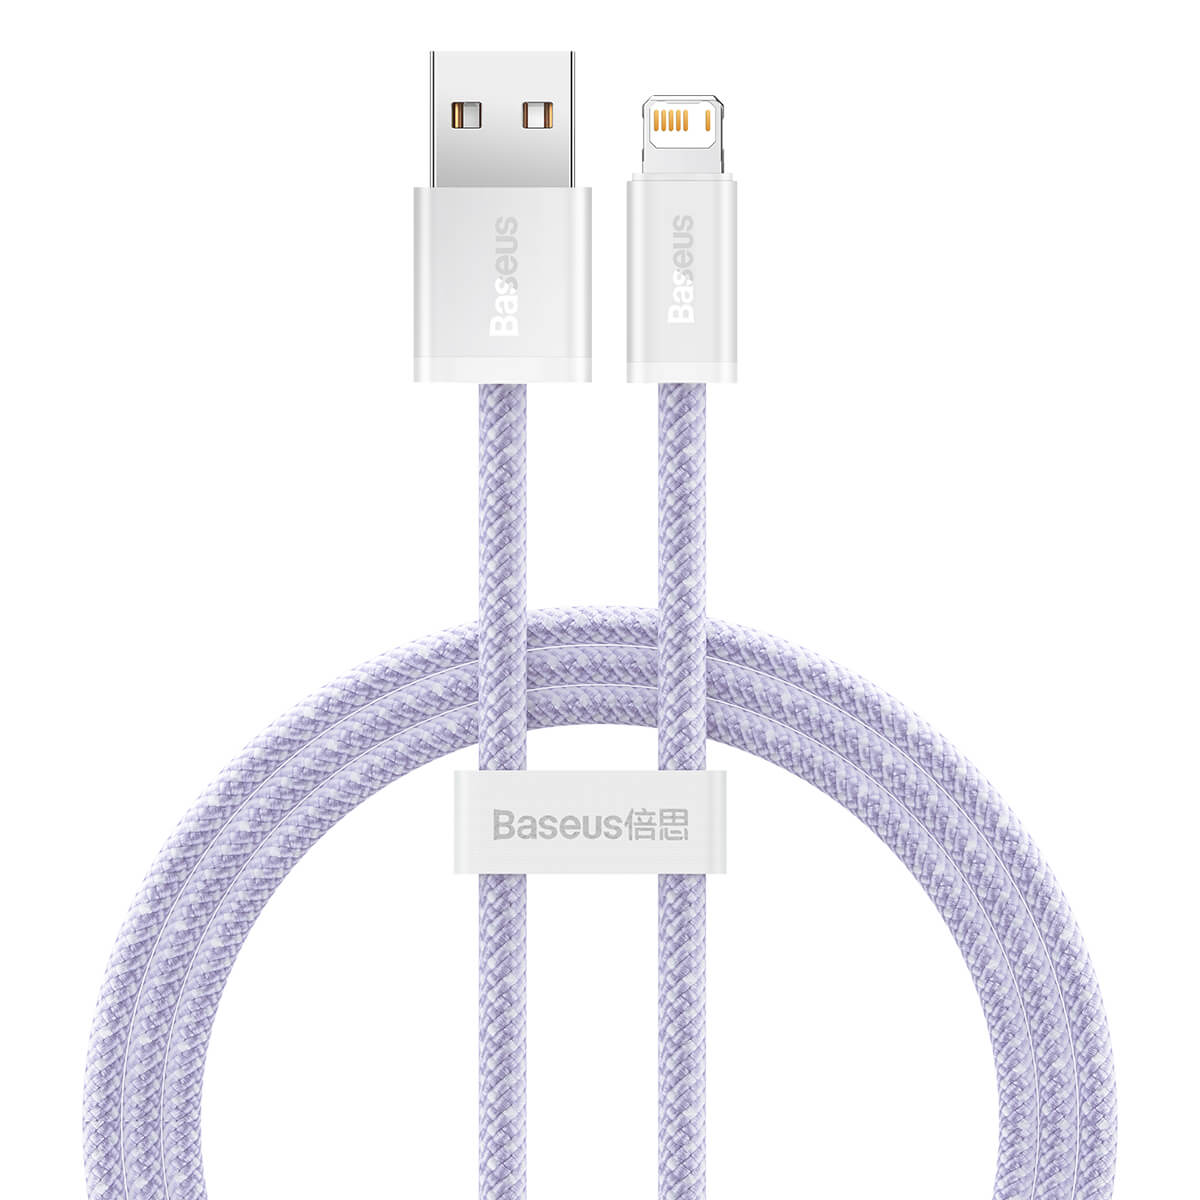 Baseus Dynamic 2 Series Fast Charging Data Cable USB to iPhone 2.4A